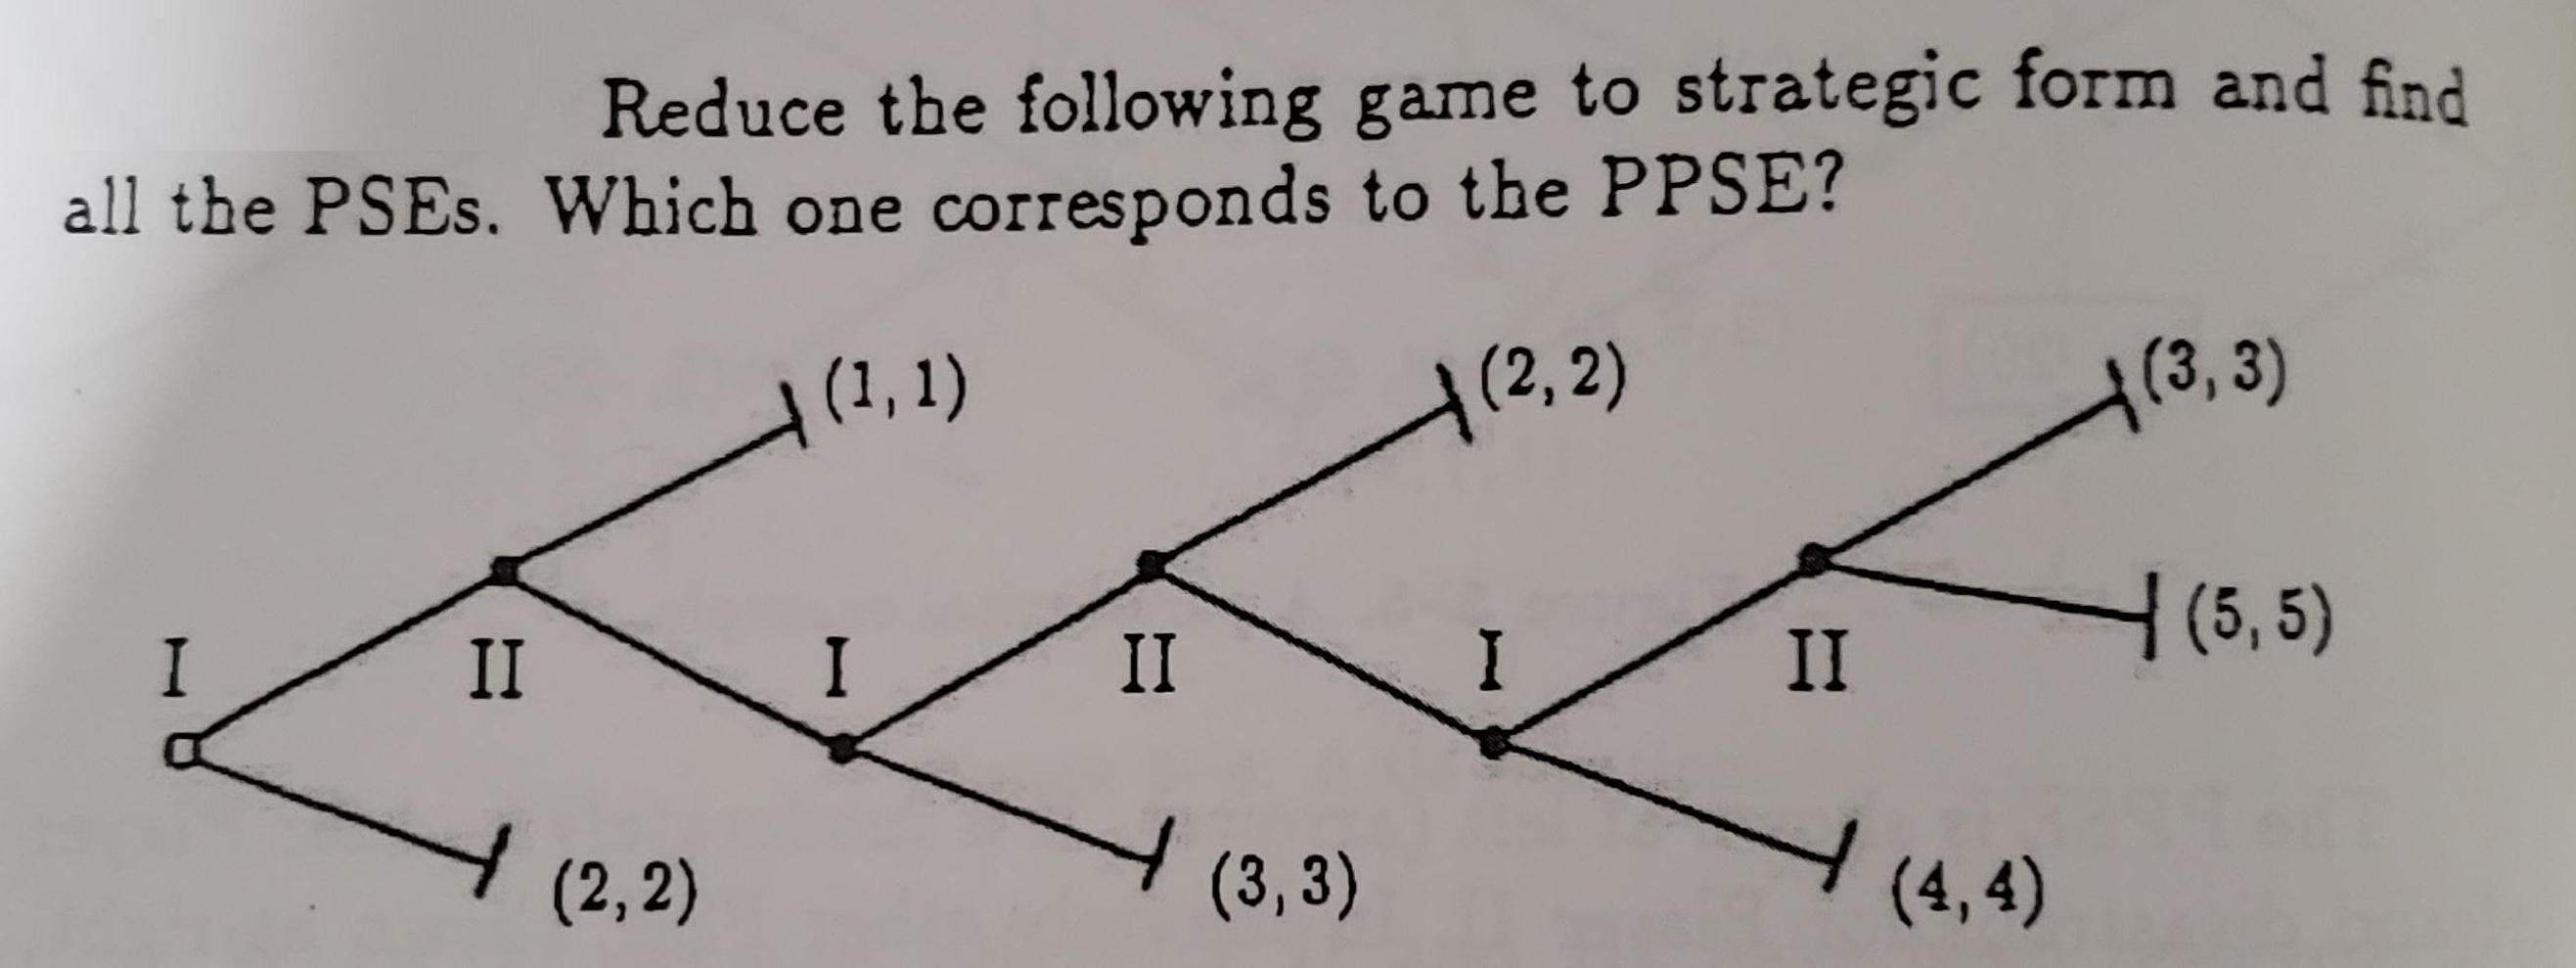 Reduce the following game to strategic form and find all the PSEs. Which one corresponds to the PPSE? (2,2) I